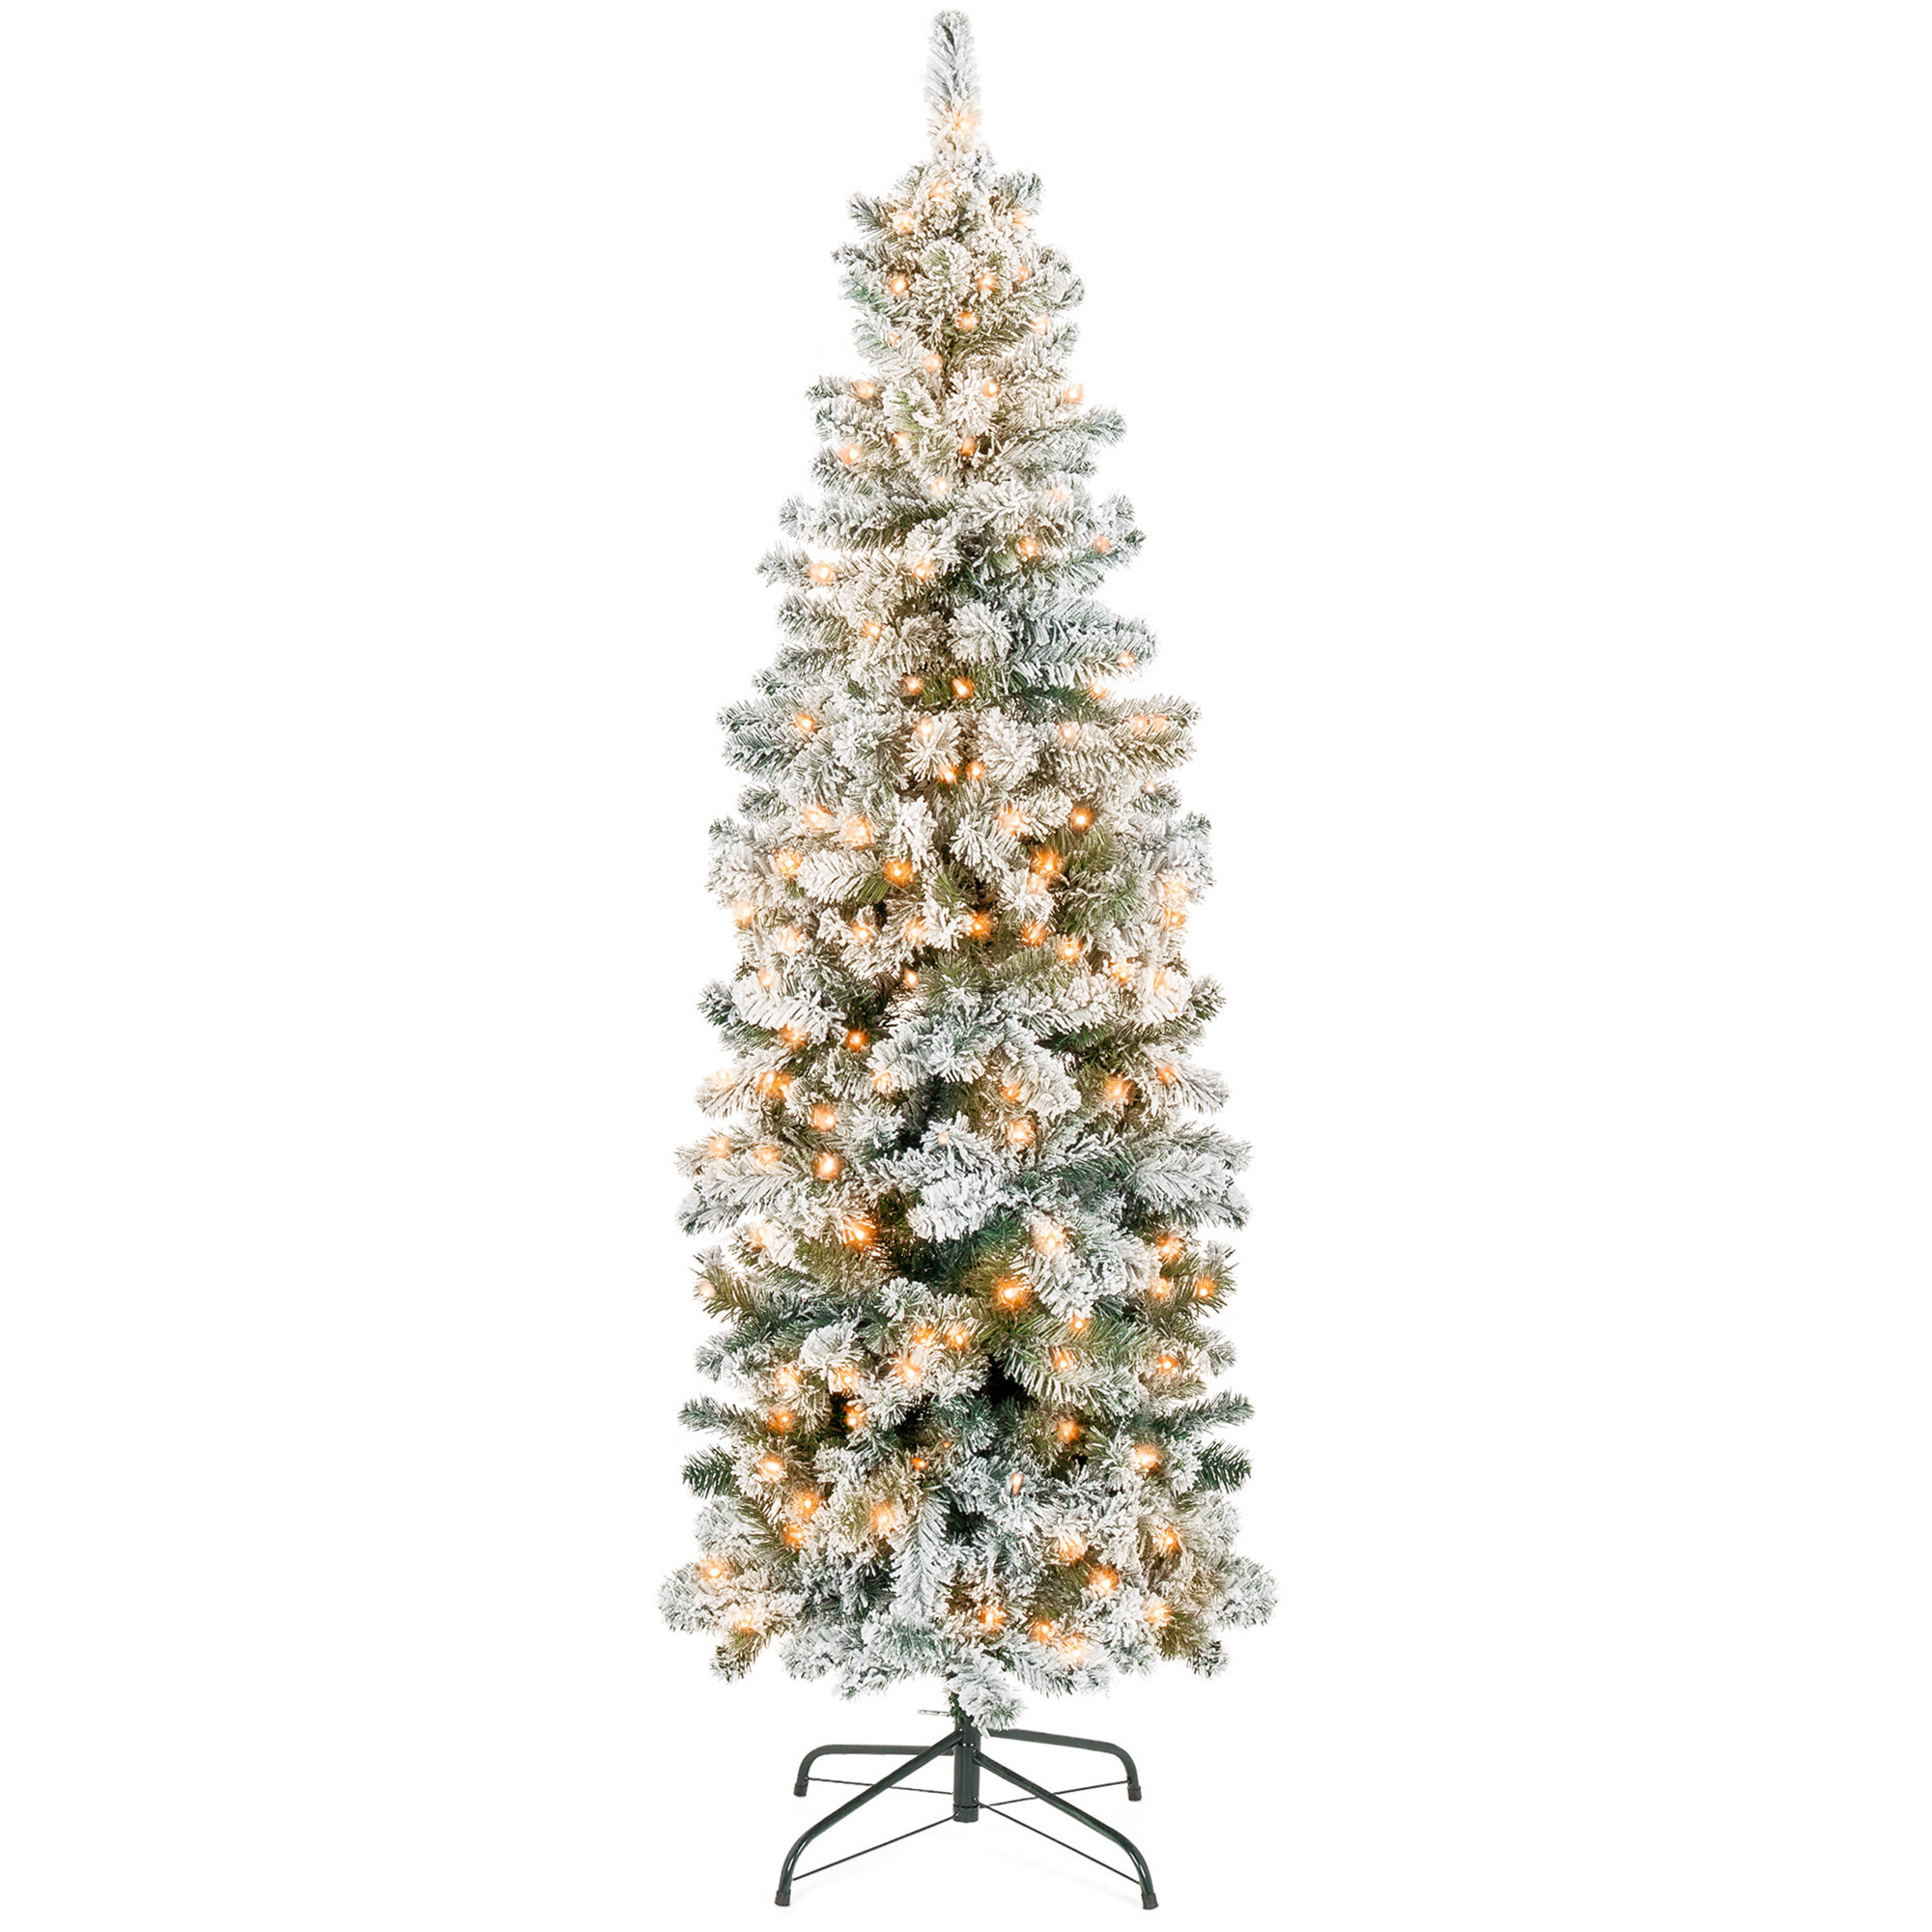 Best Choice Products 7.5ft Pre-Lit Artificial Snow Flocked Pencil Christmas Tree Holiday Decoration w/ 350 Clear Lights - image 1 of 7